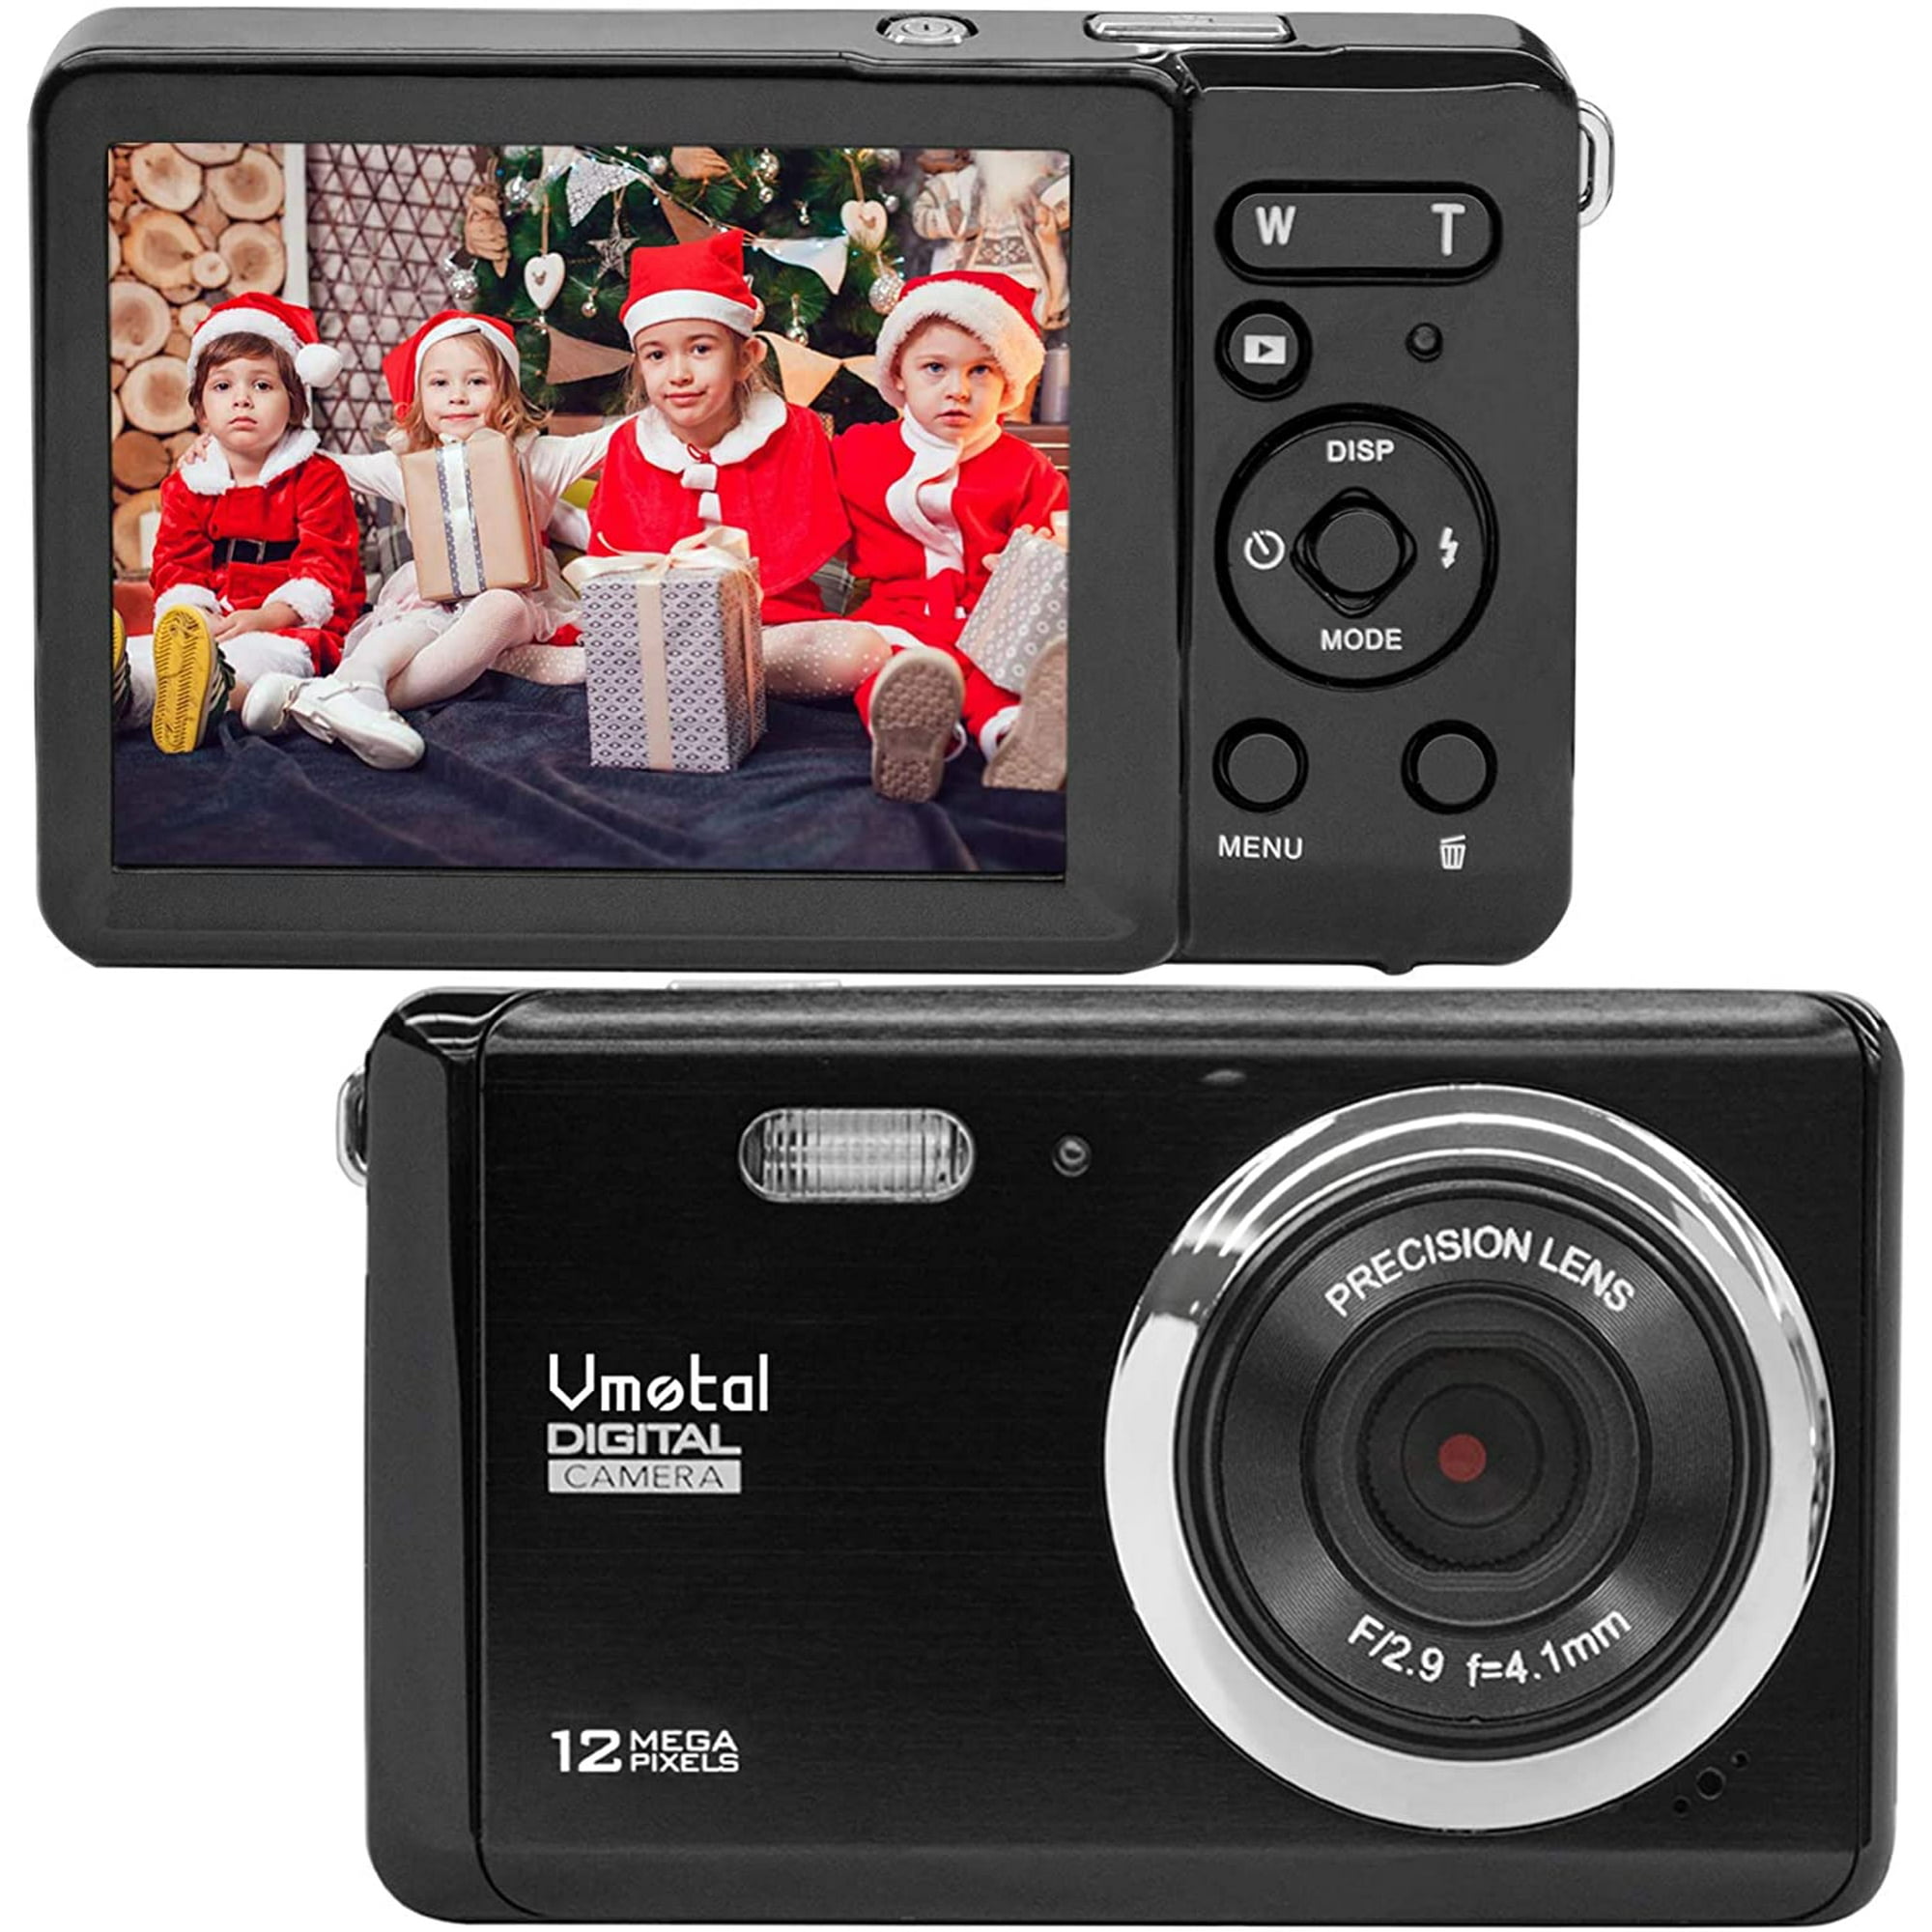 Digital Camera for Kids, HD Video Camera 2.8" LCD Screen, Rechargeable Point and Shoot Camera, Compact Portable Cameras for Kids, Beginner, Students,Teens | Walmart Canada